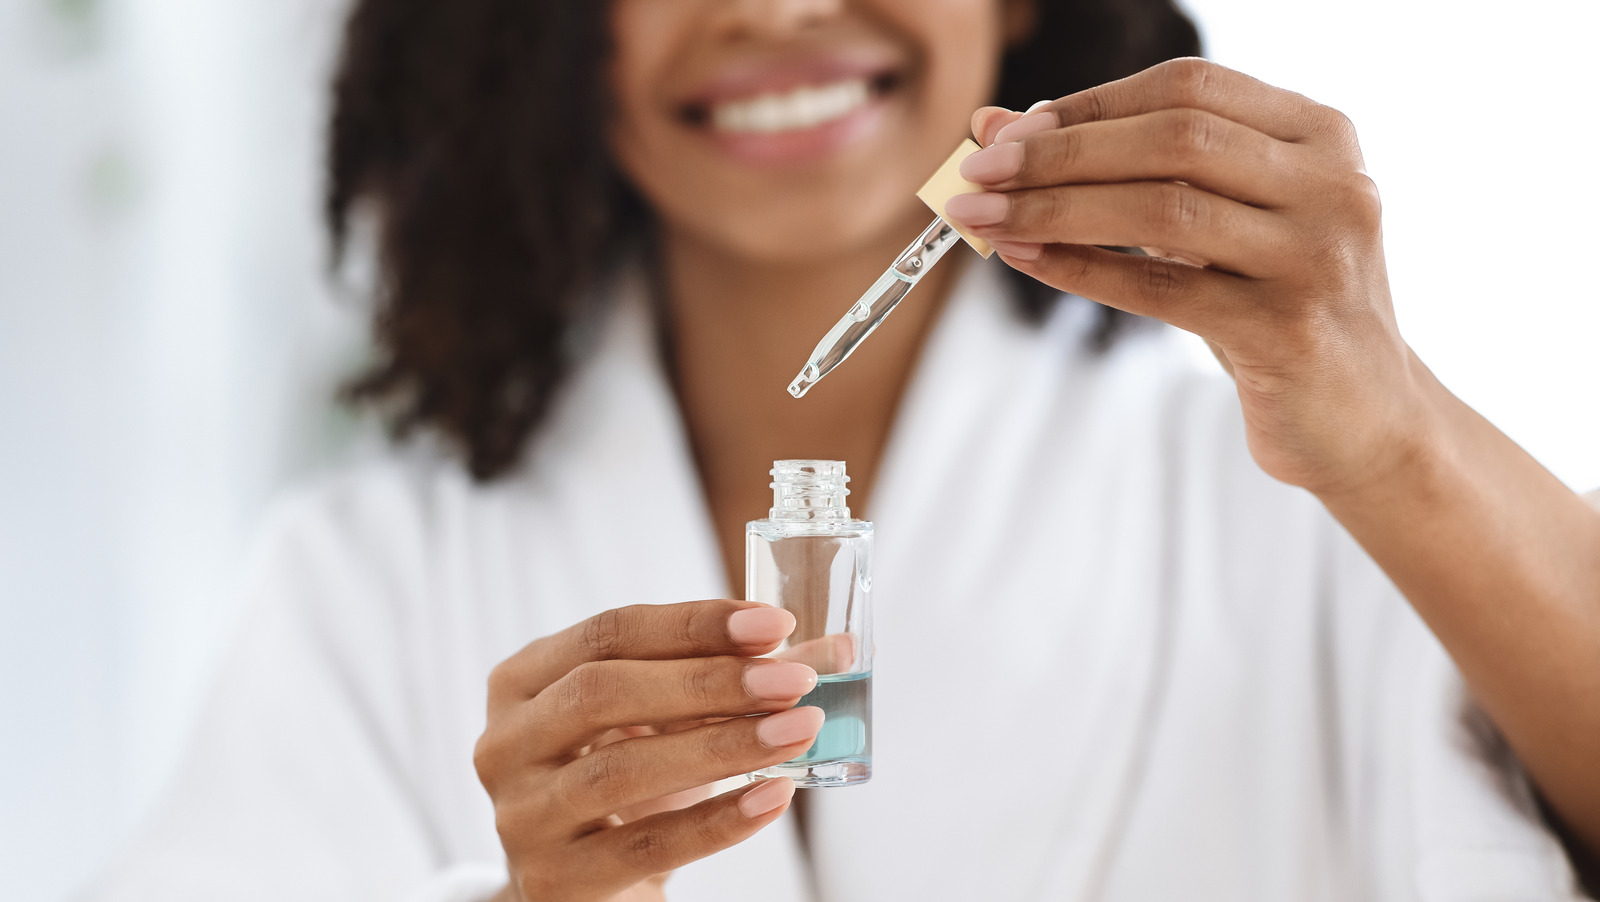 Skincare ingredients you shouldn't be mixing, according to an